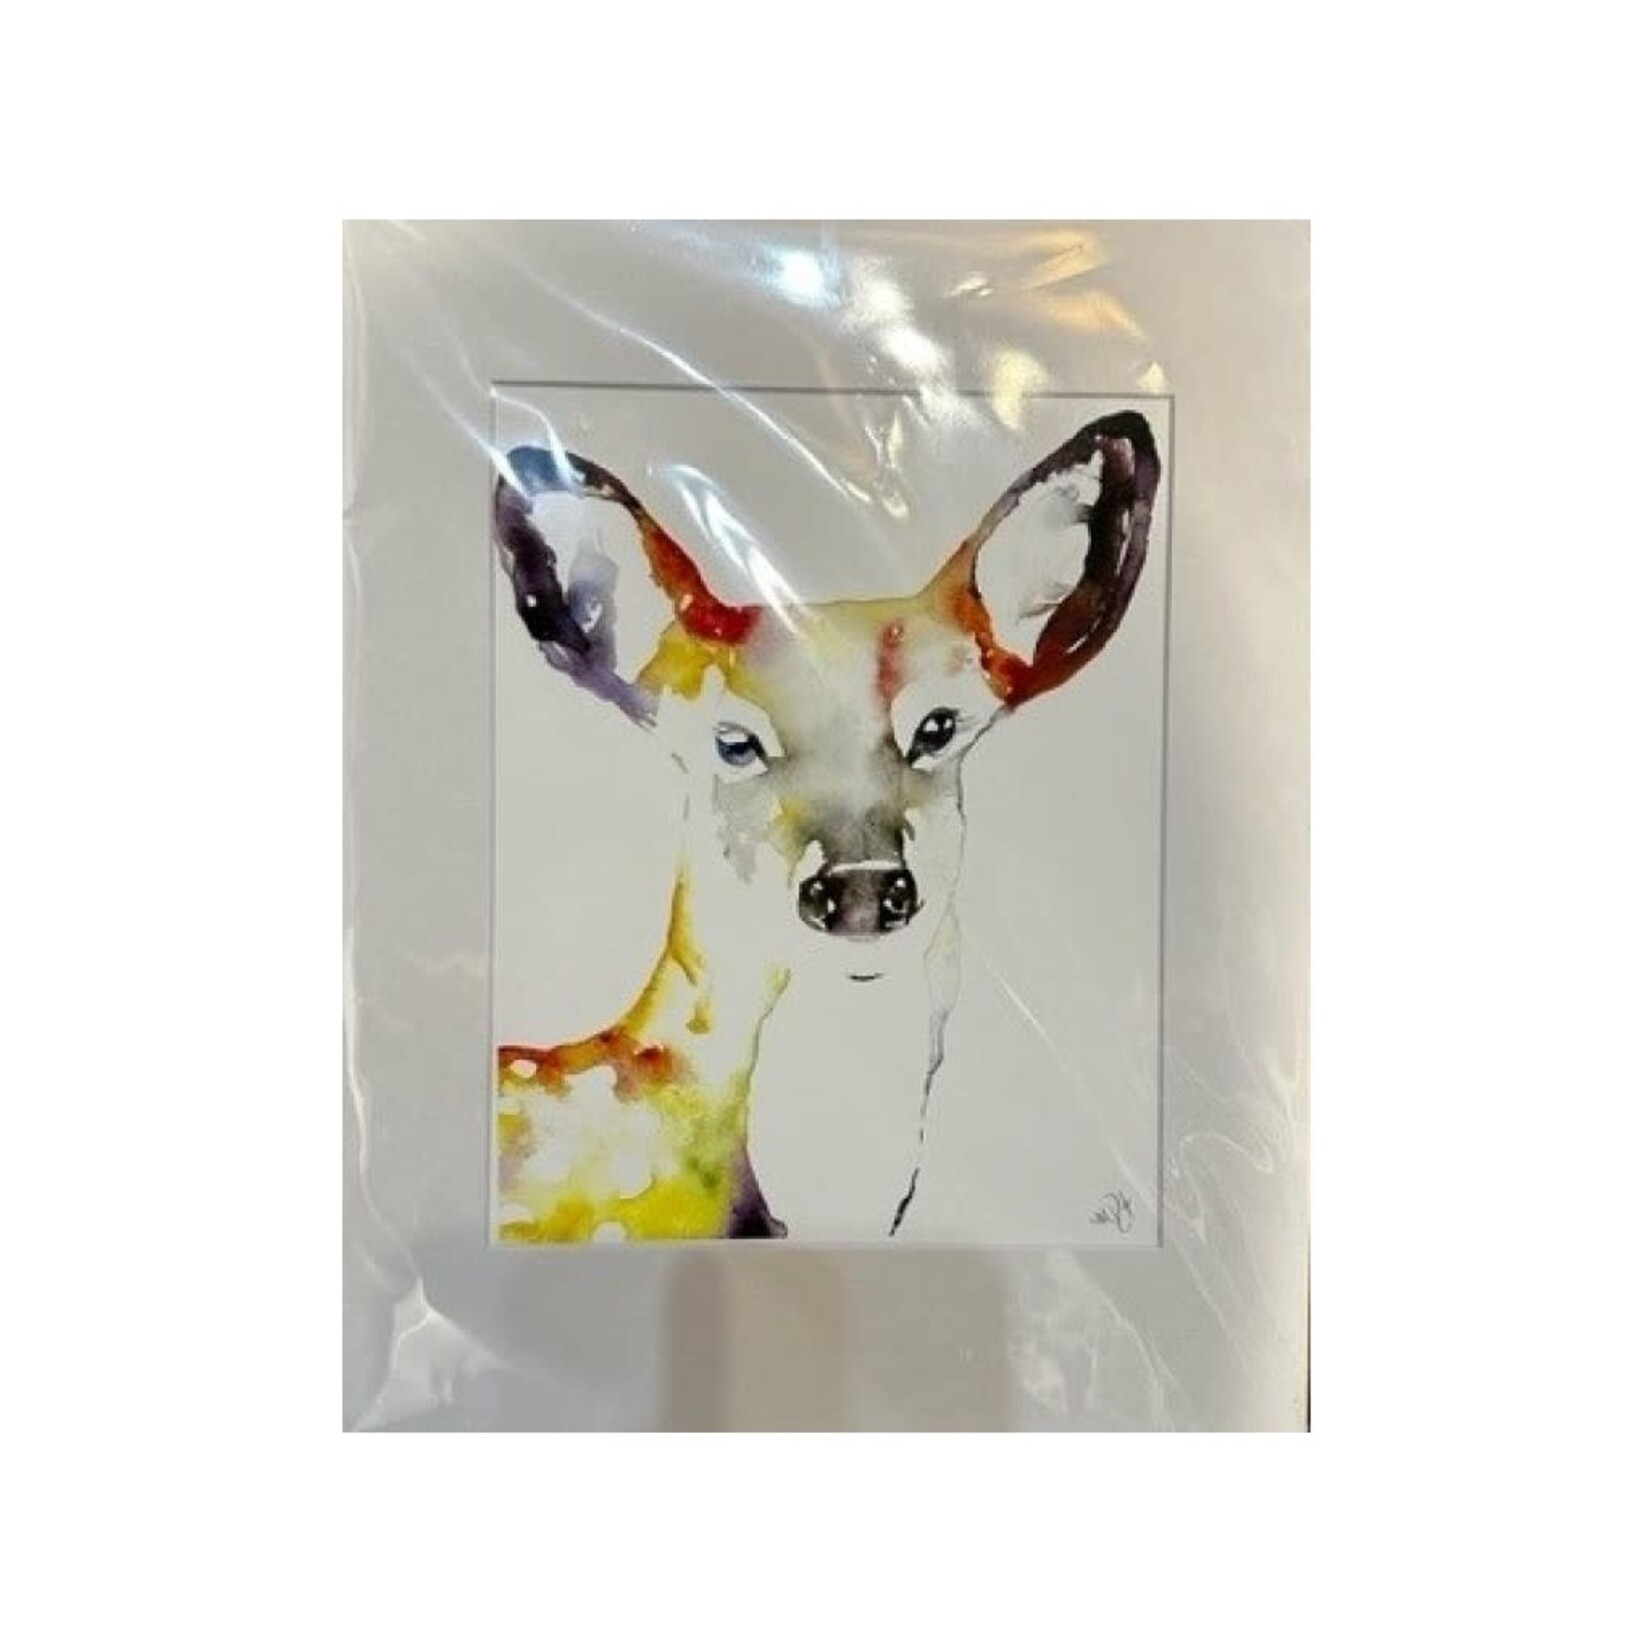 Michelle Detering Limited Matted Print - Deer